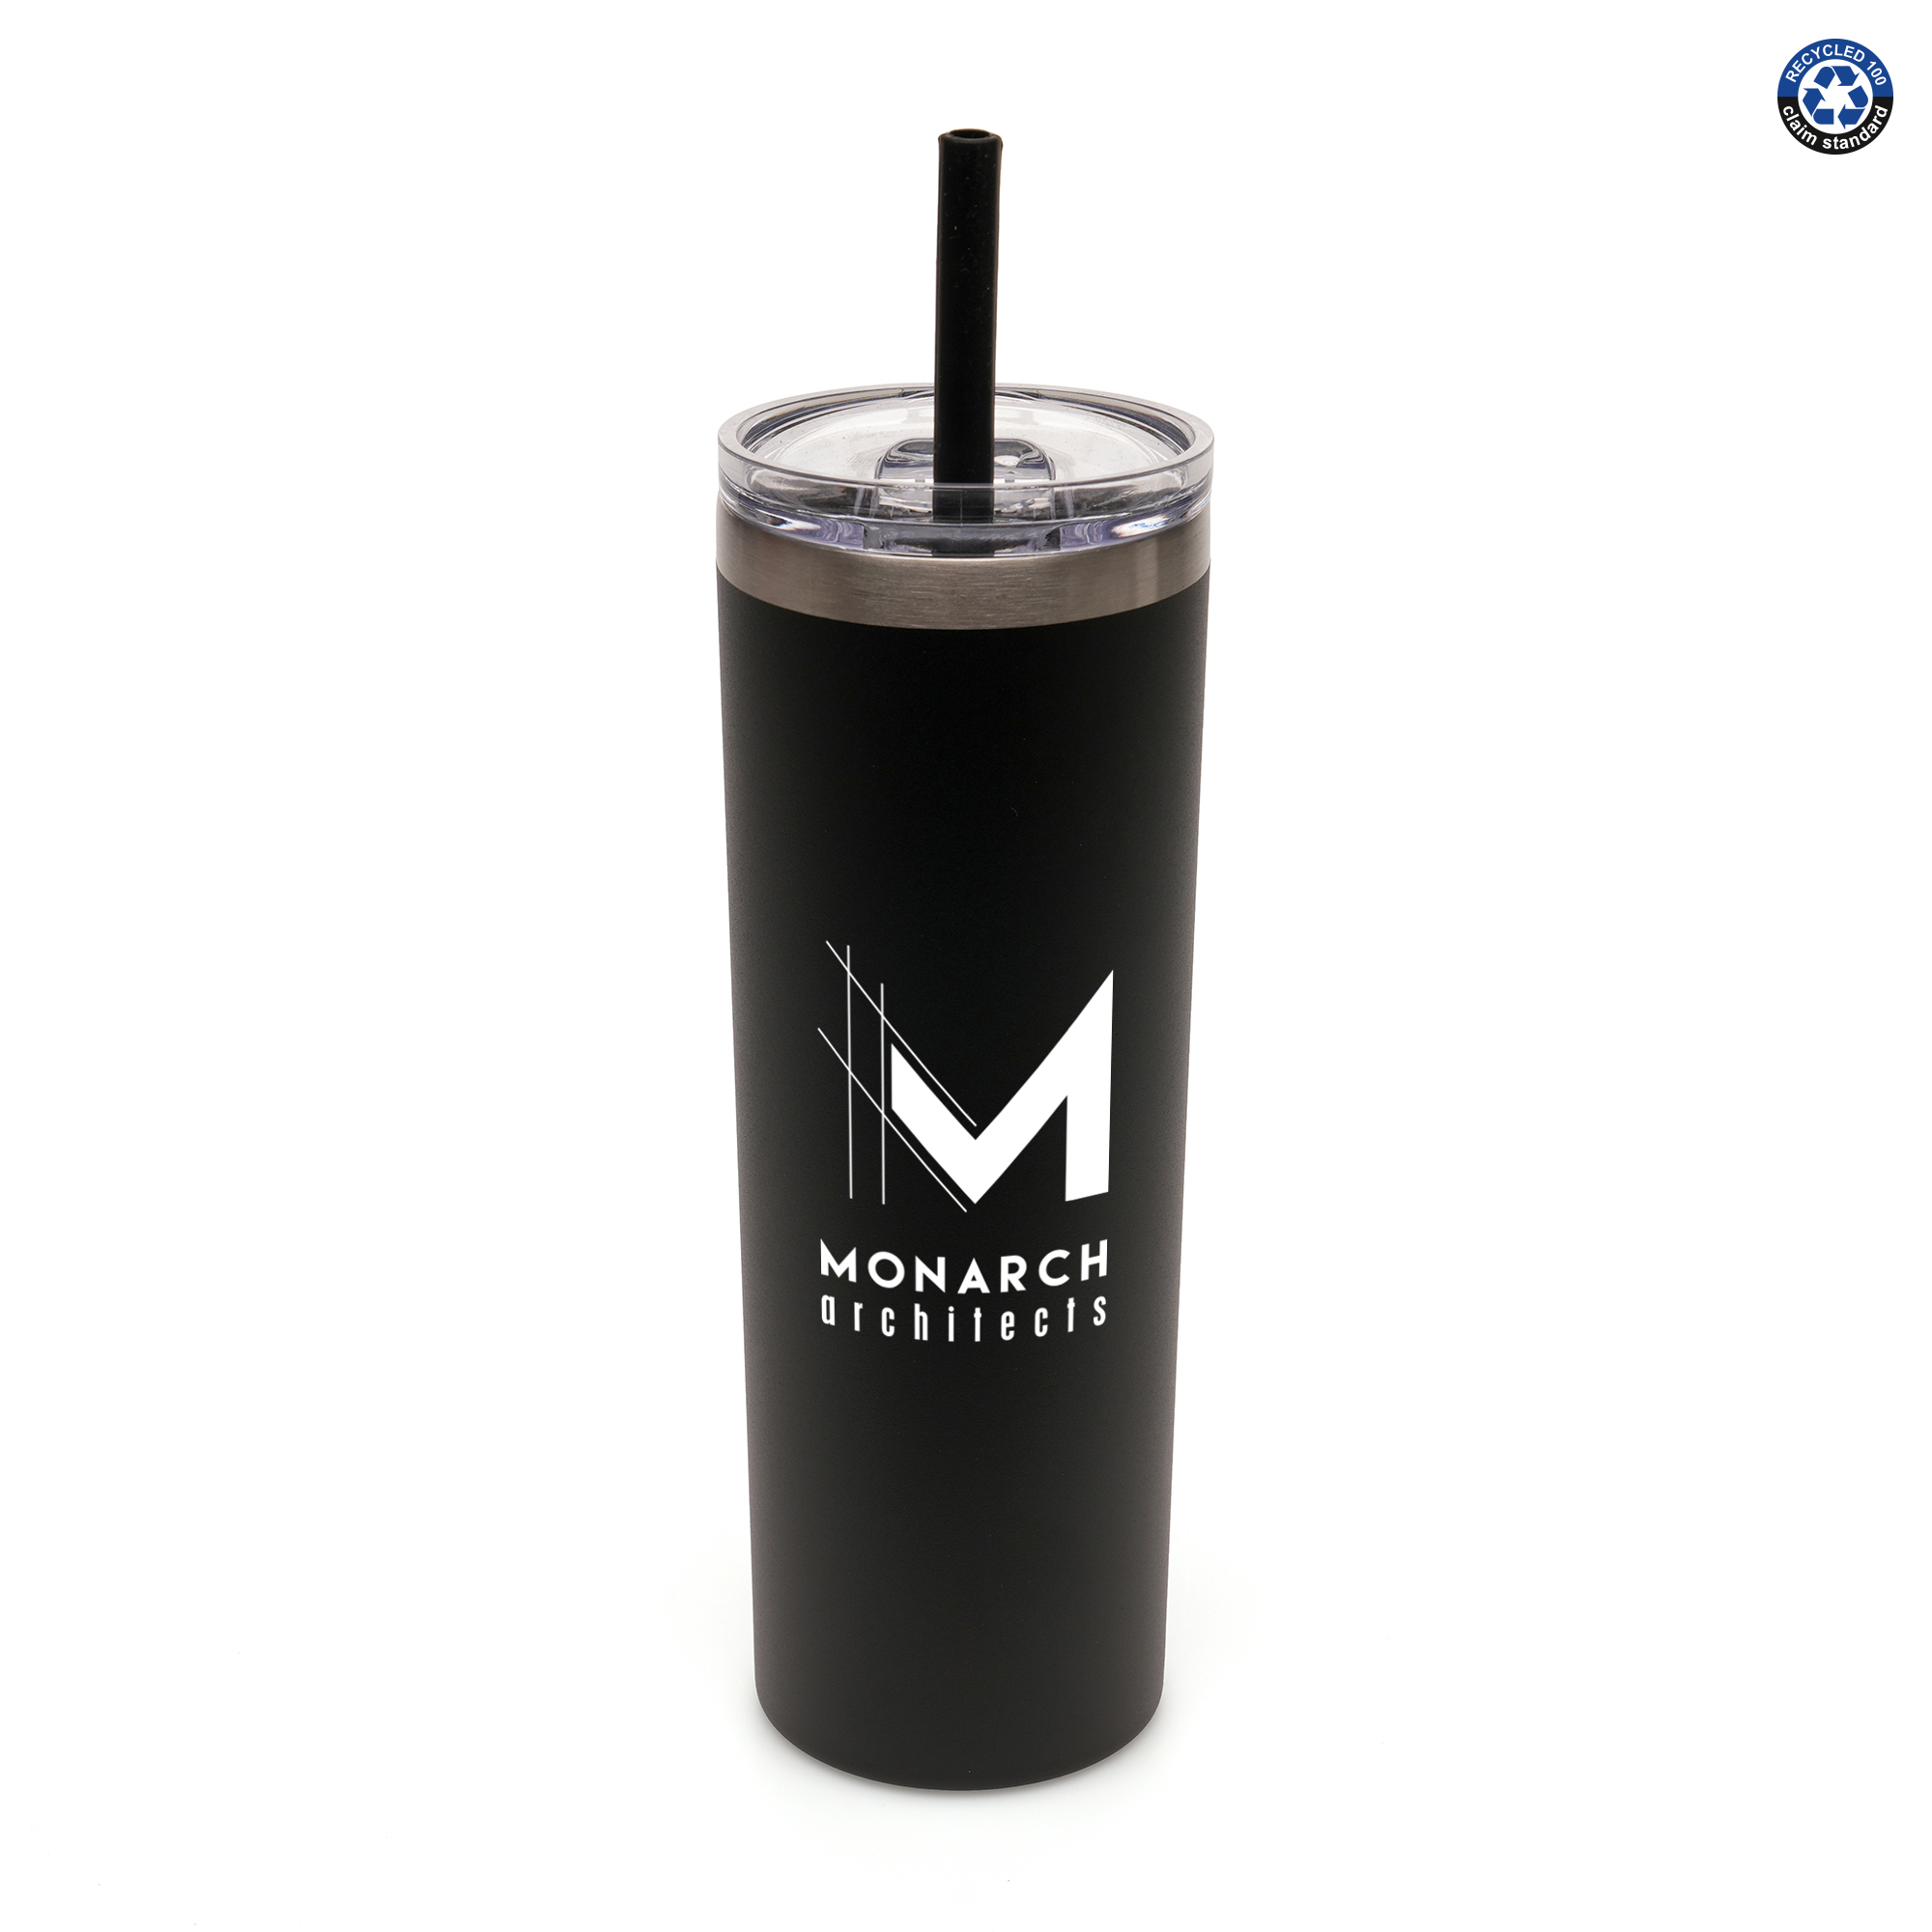 580ml double walled stainless steel RCS certified tumbler with clear PS push on lid and Silicone straw to prevent spills. A stylish promotional product for those who travel or are constantly on the go. BPA & PVC free.